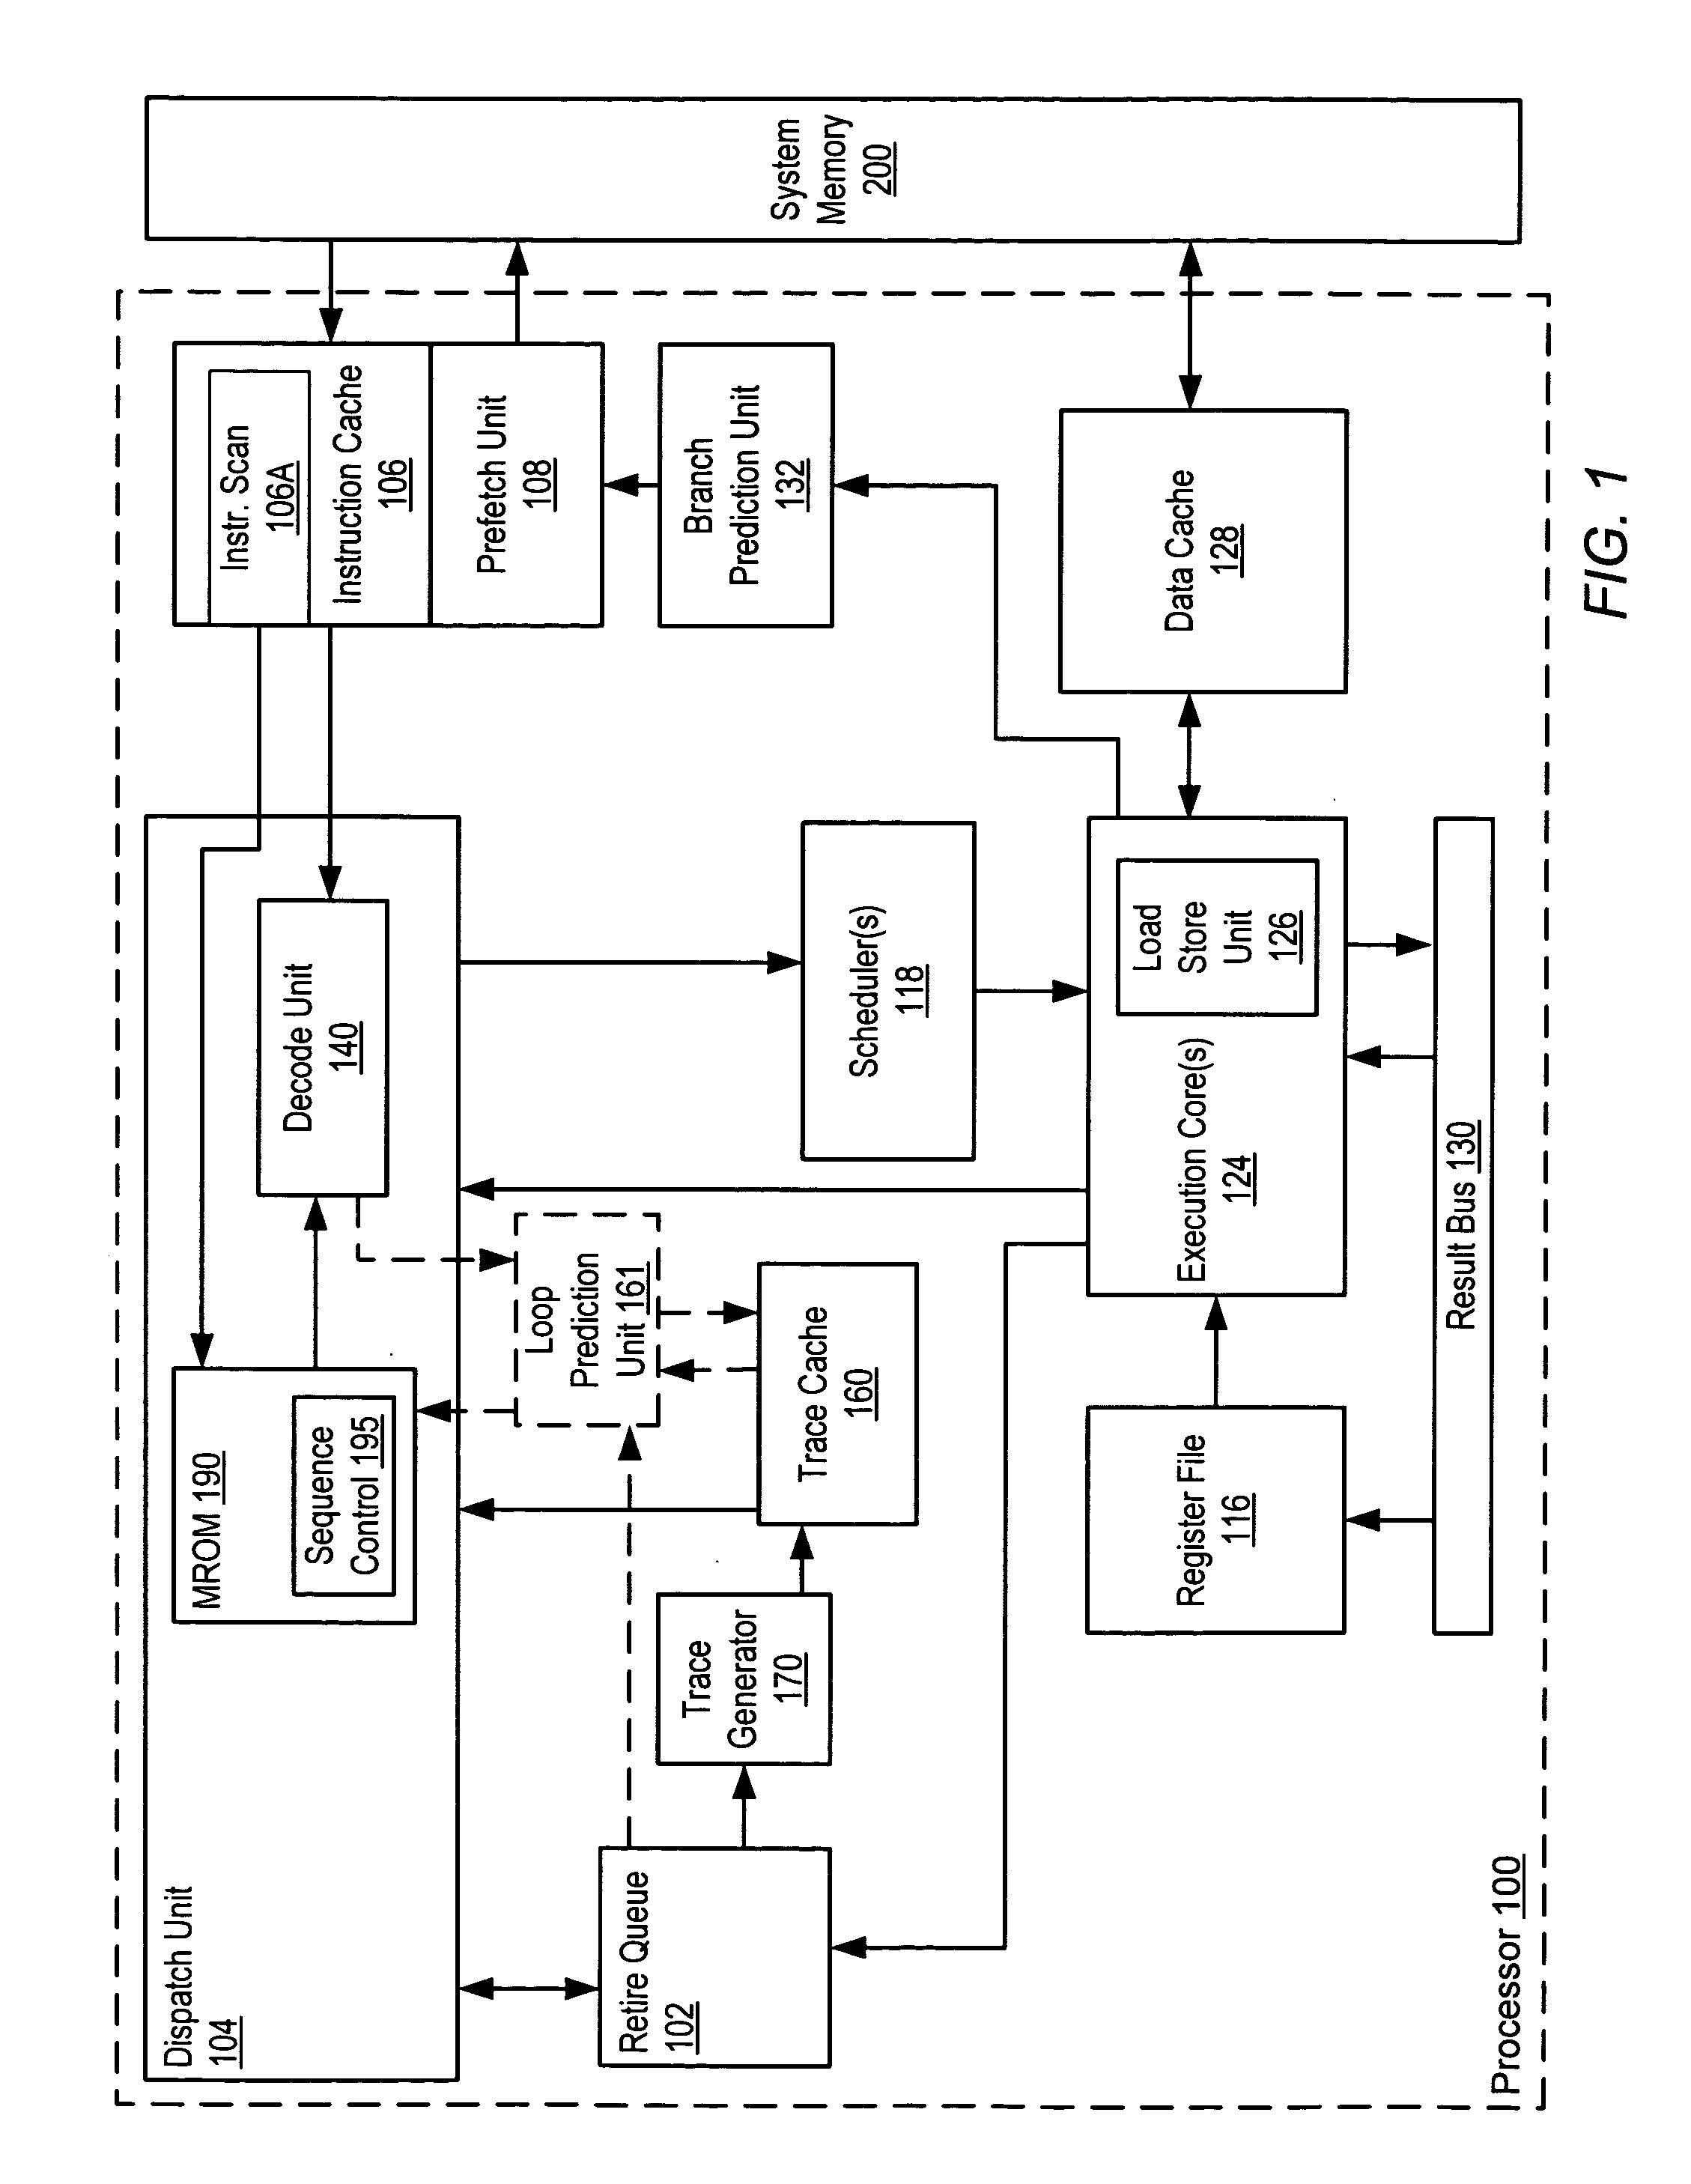 Method for optimizing loop control of microcoded instructions